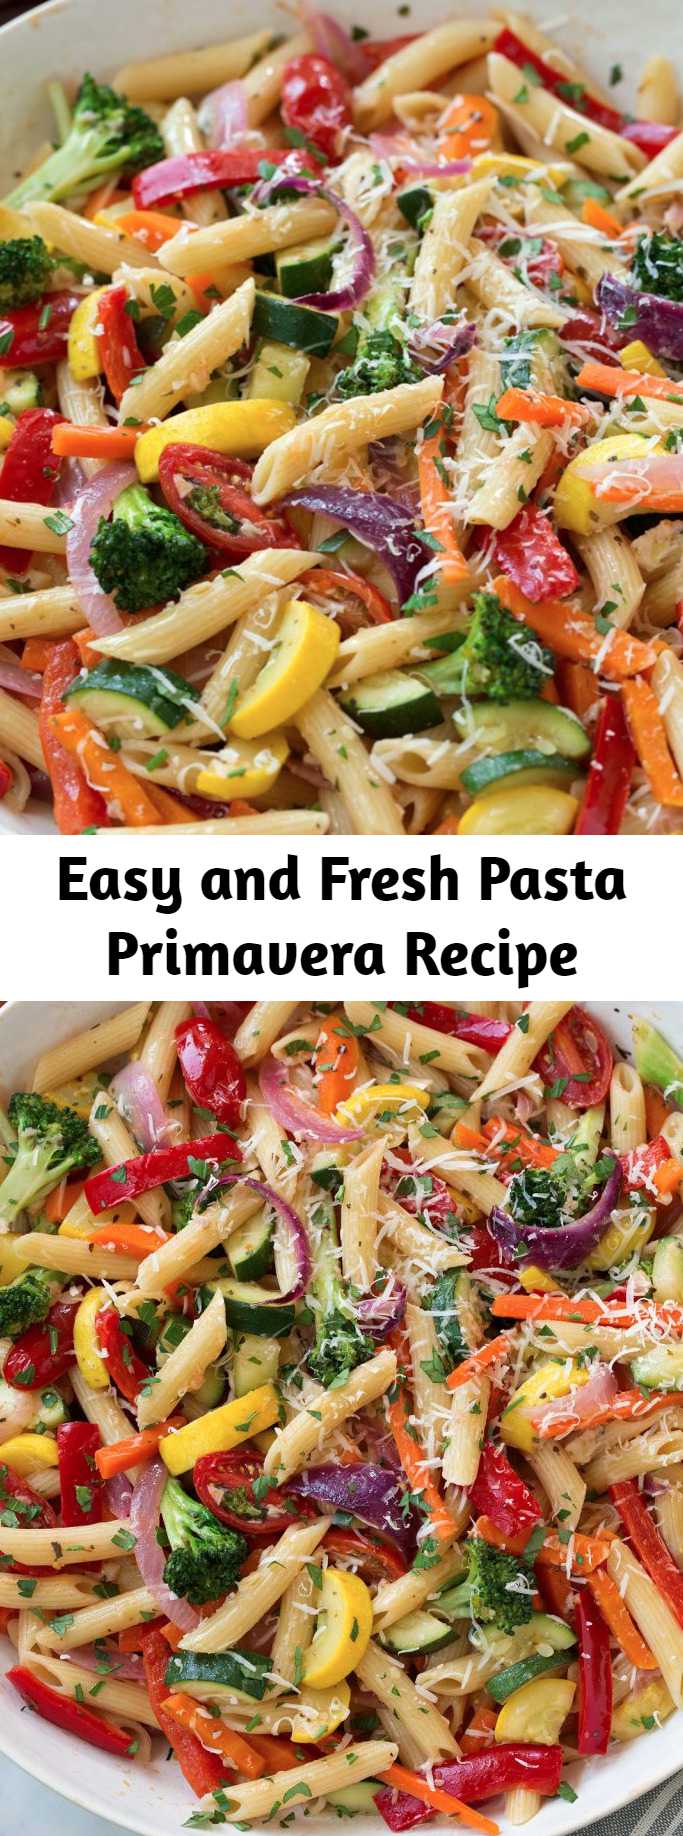 Easy and Fresh Pasta Primavera Recipe - This hearty, veggie packed pasta dish isn’t just for spring and summer, this is a packed pasta dish that’s perfect year round! It has such a satisfying flavor and it’s versatile recipe so you can add different kinds of vegetables you might already have on hand. #pasta #primavera #dinner #recipe